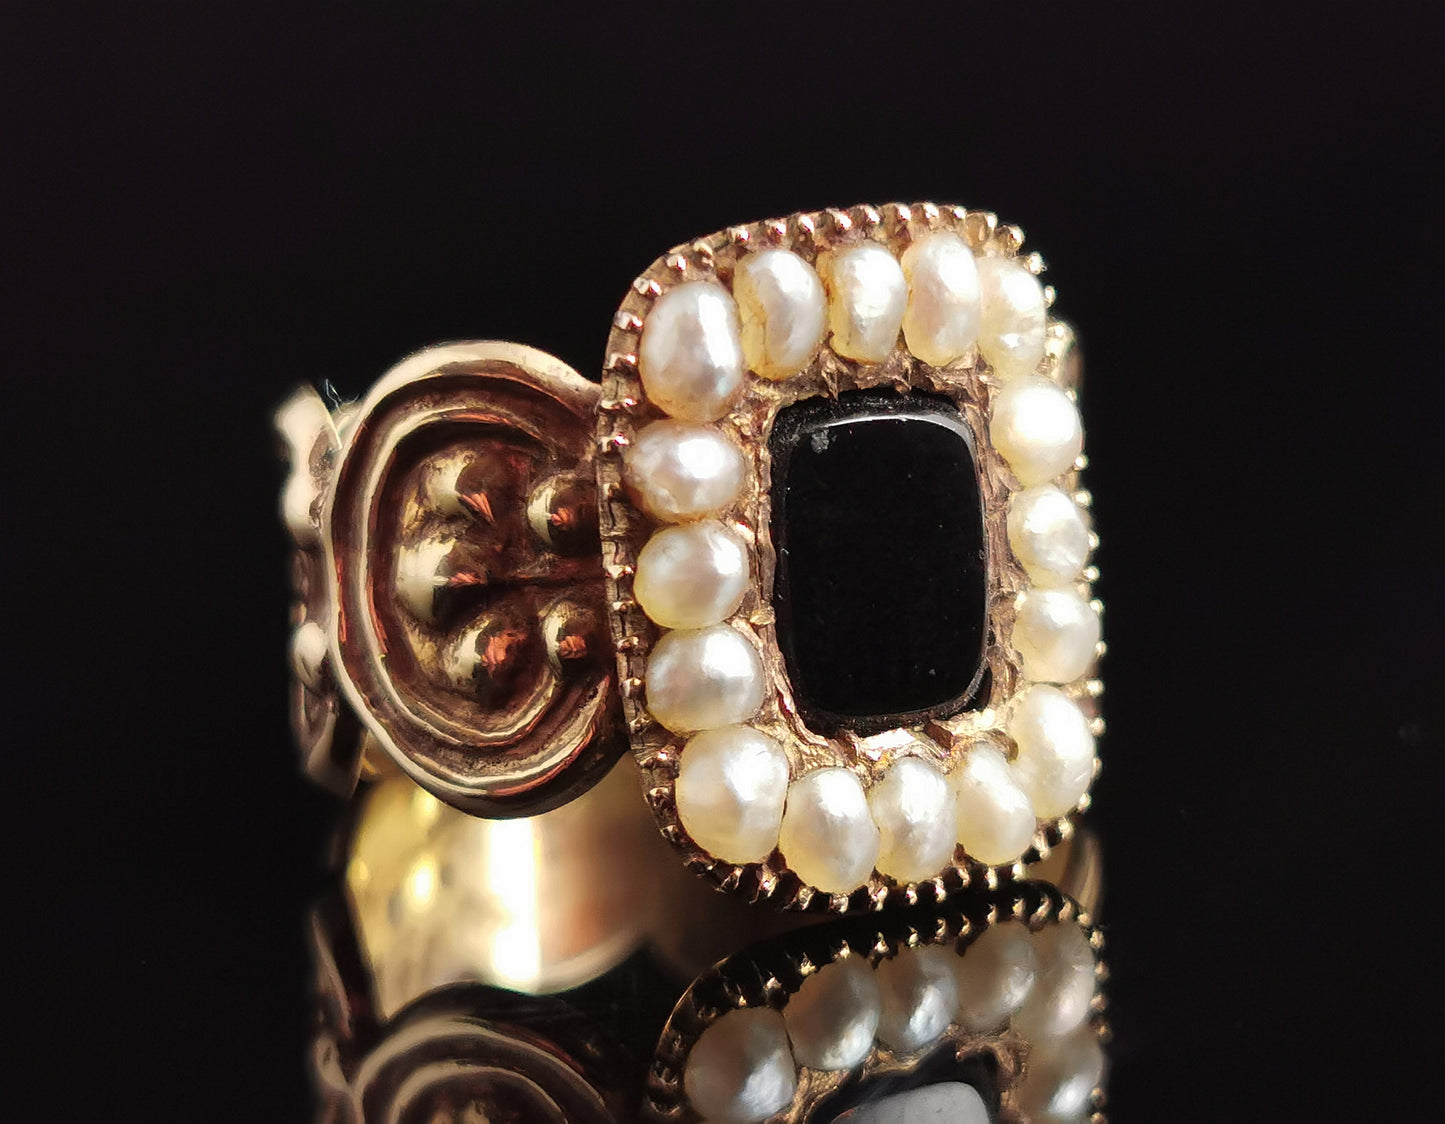 Antique Regency mourning ring, 18ct gold, Onyx and pearl